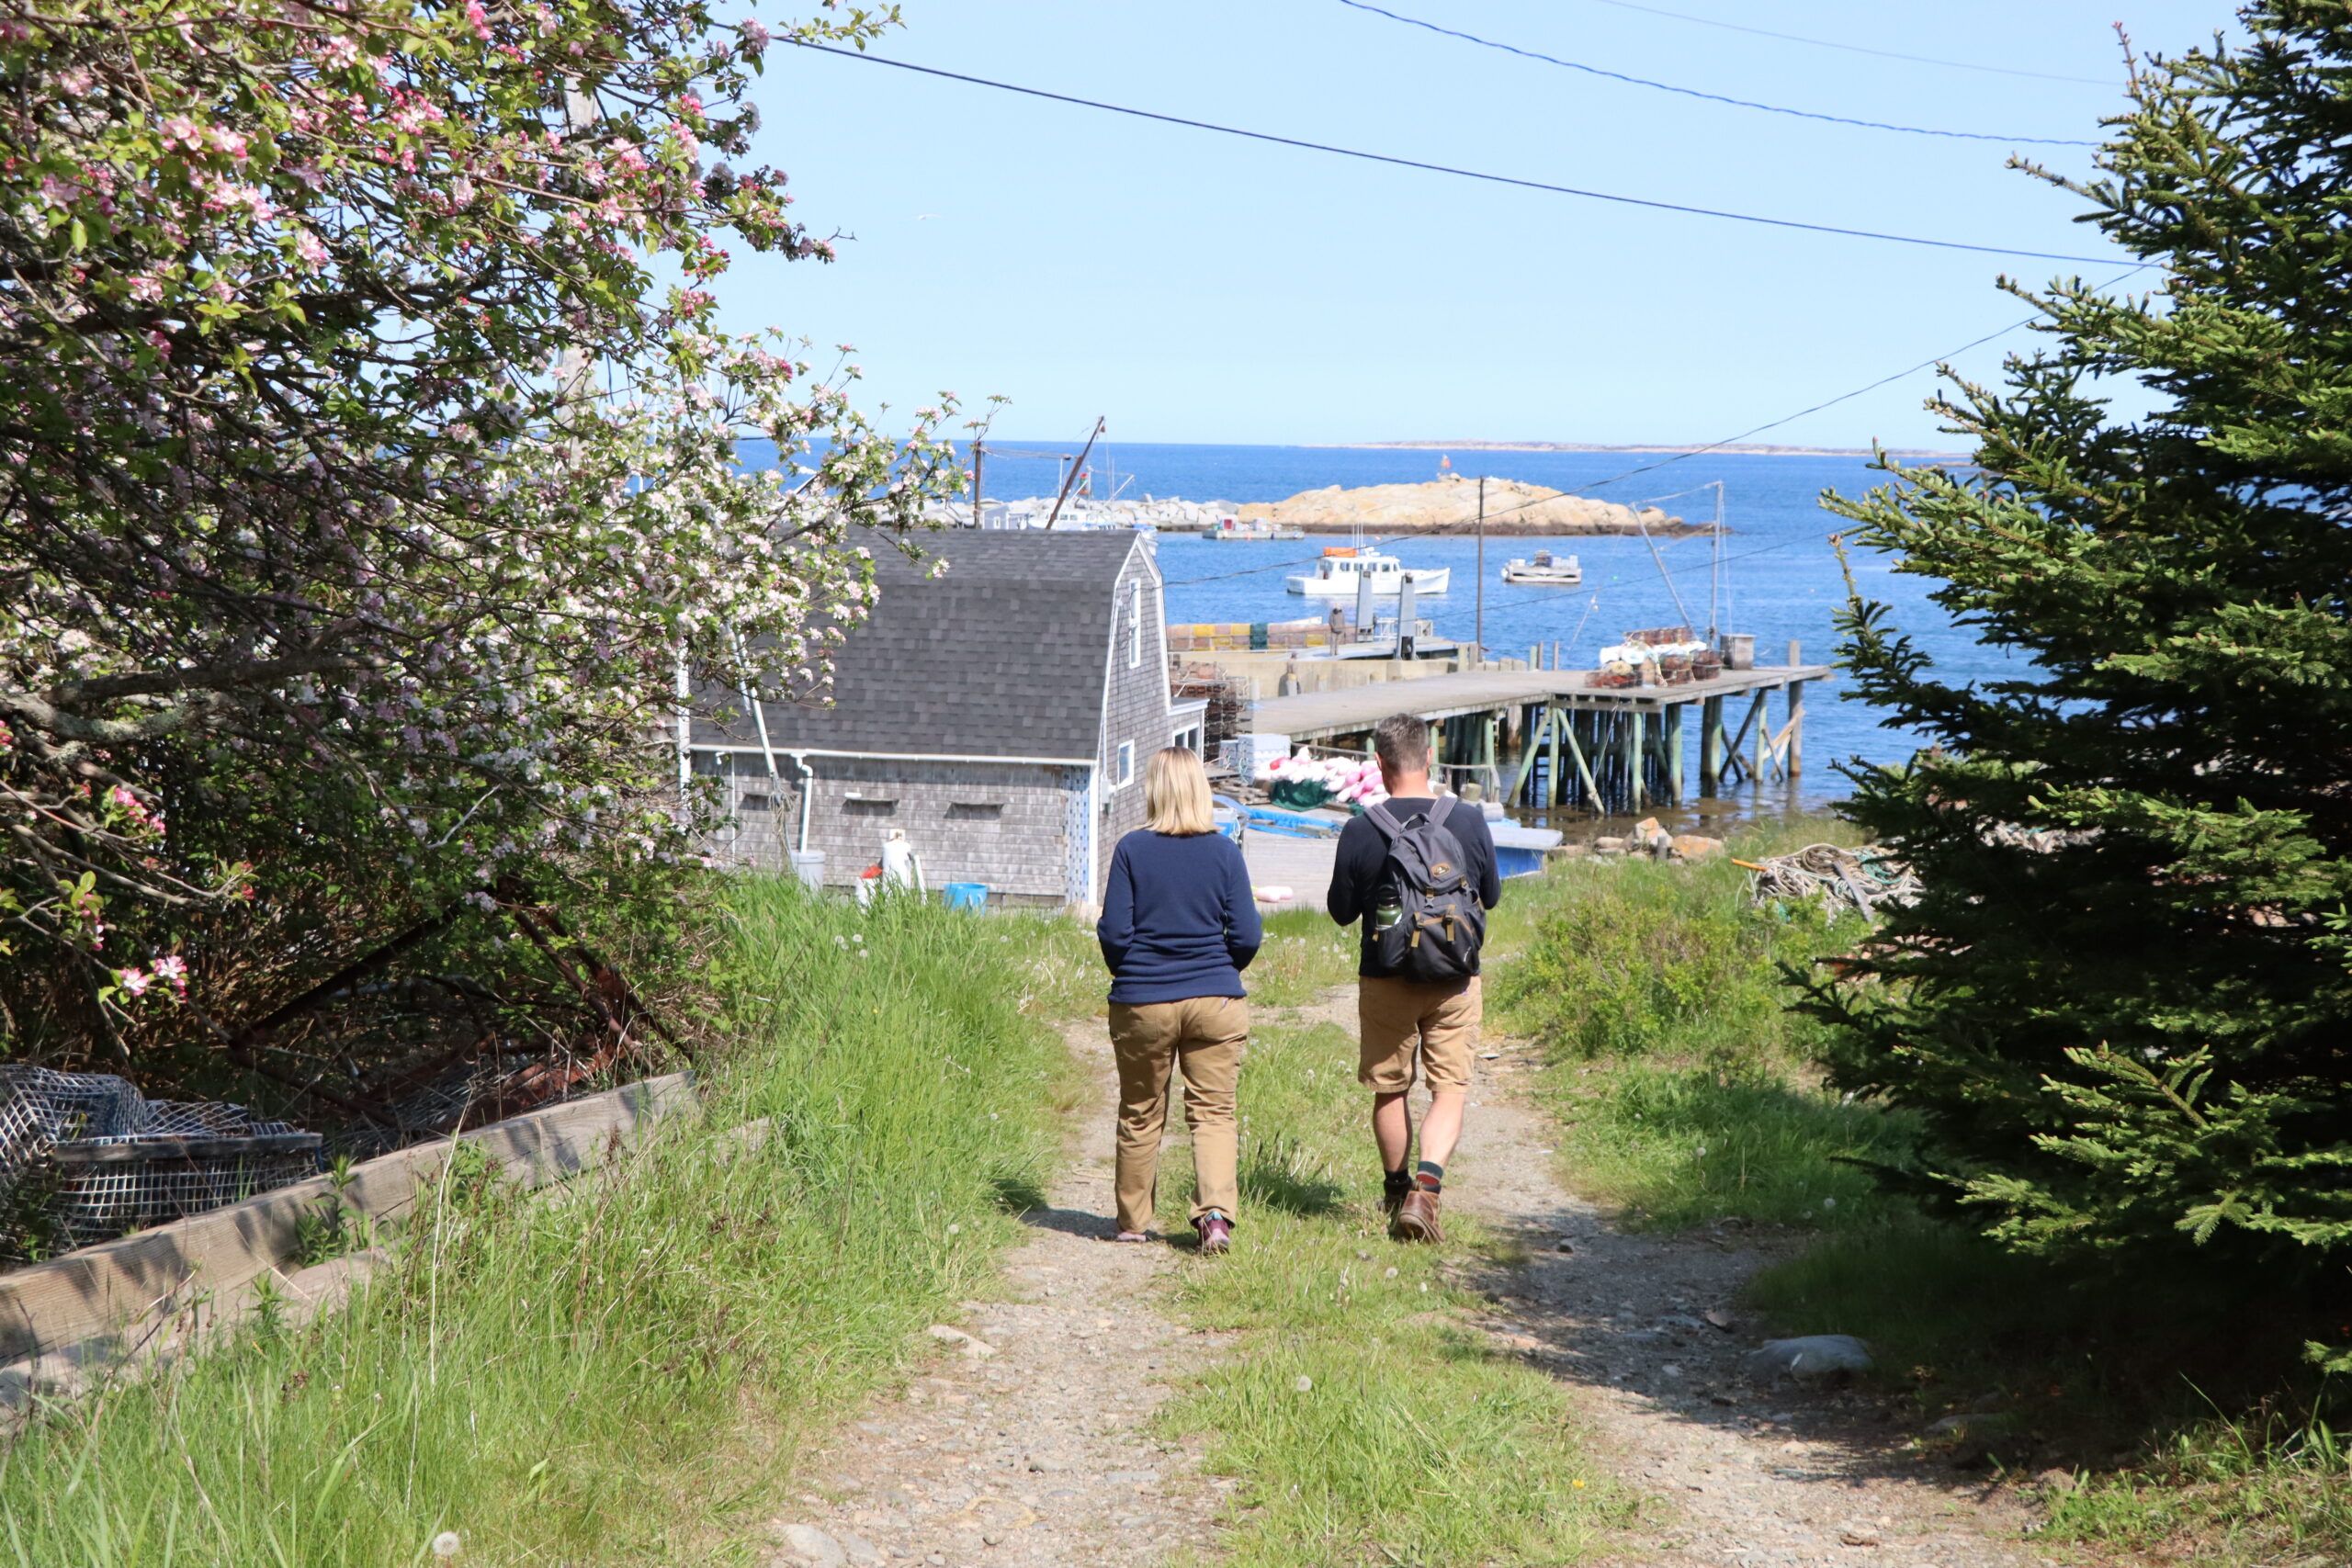 A man and a woman walk away from the camera. They are walking on a dirt path overlooking the ocean. 